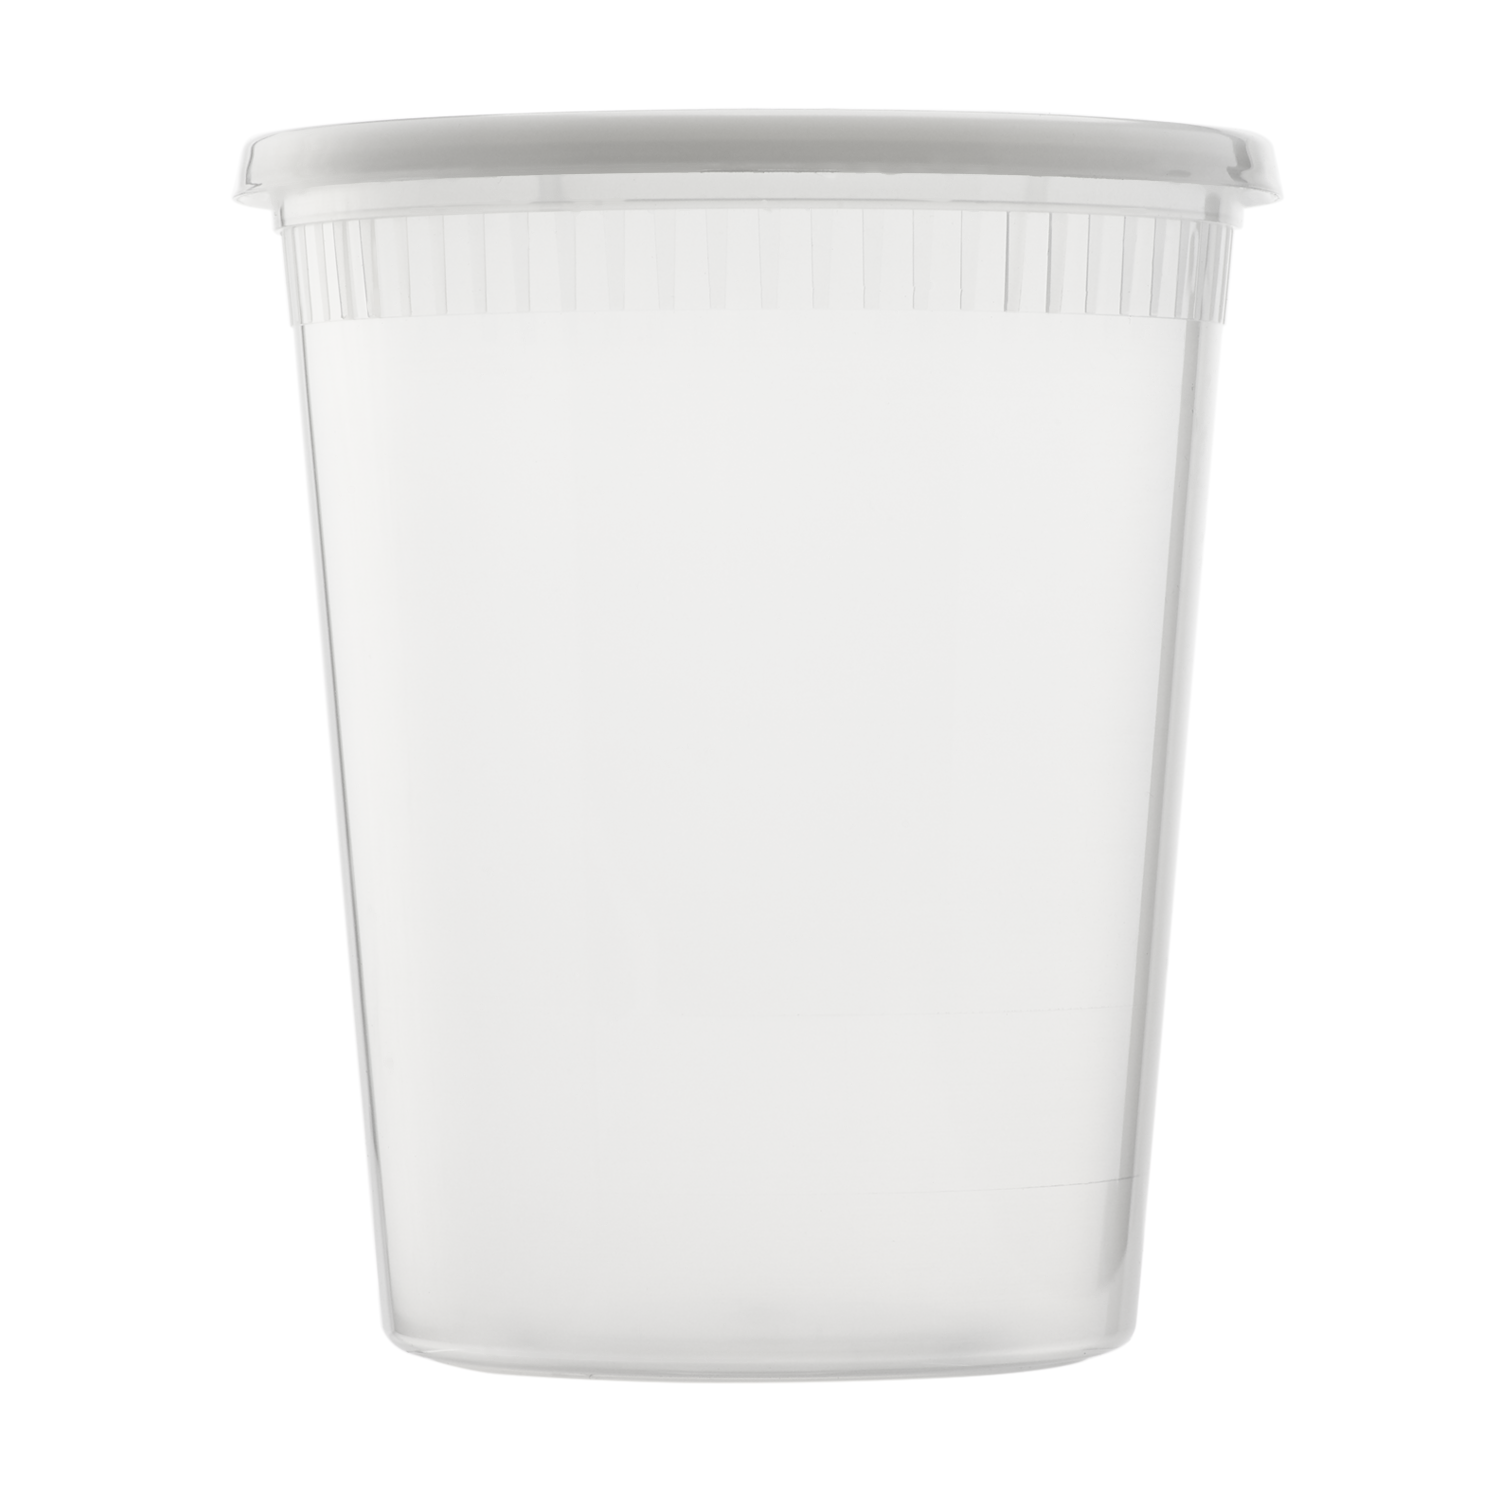 32 oz Boba tea injection bucket plastic cups with lids